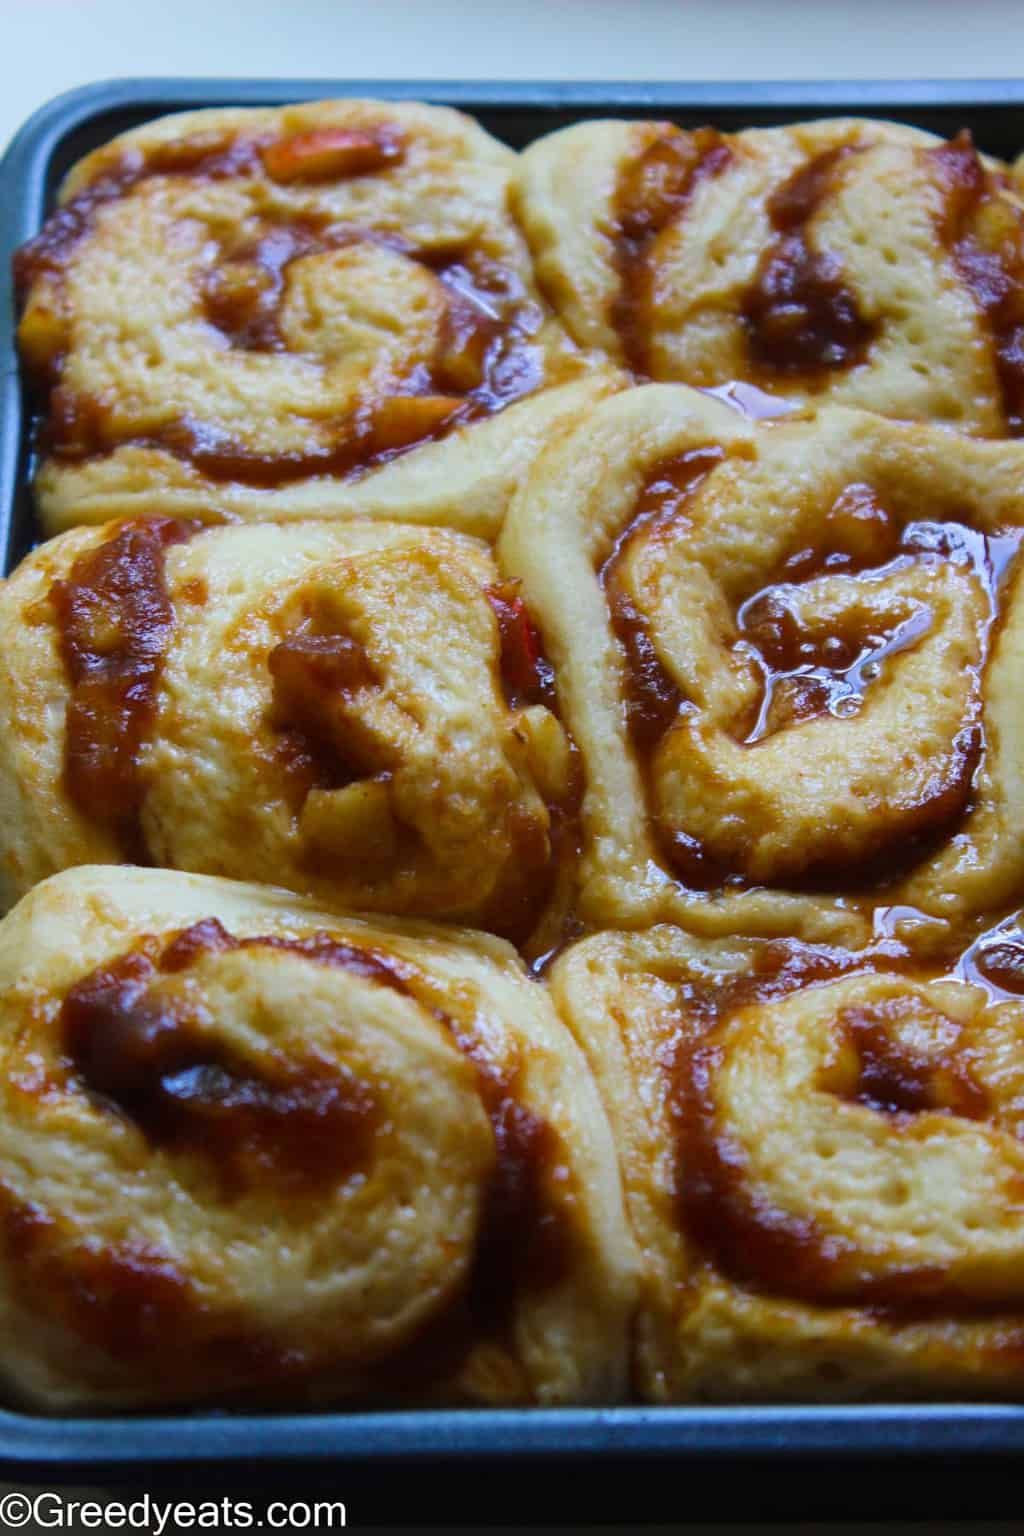 Homemade apple cinnamon rolls from scratch is the best way to start a fall morning!